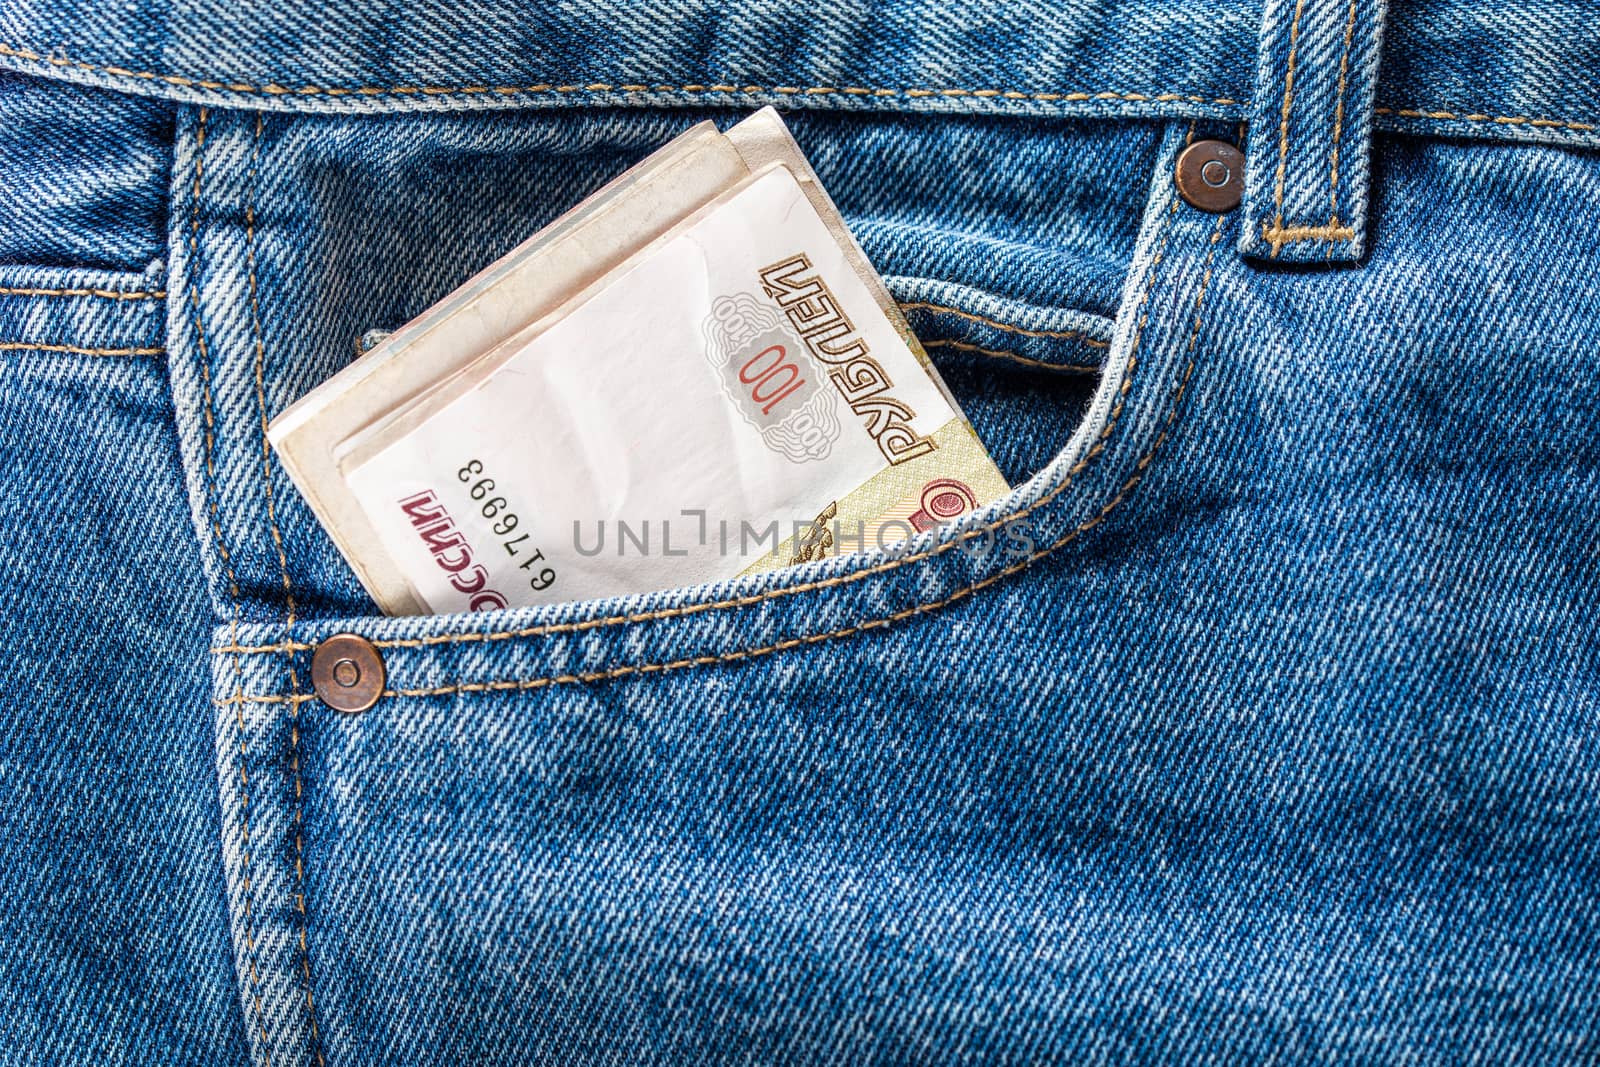 russian ruble banknotes in the front left pocket of blue jeans. Concept of saving money or pocket expenses.